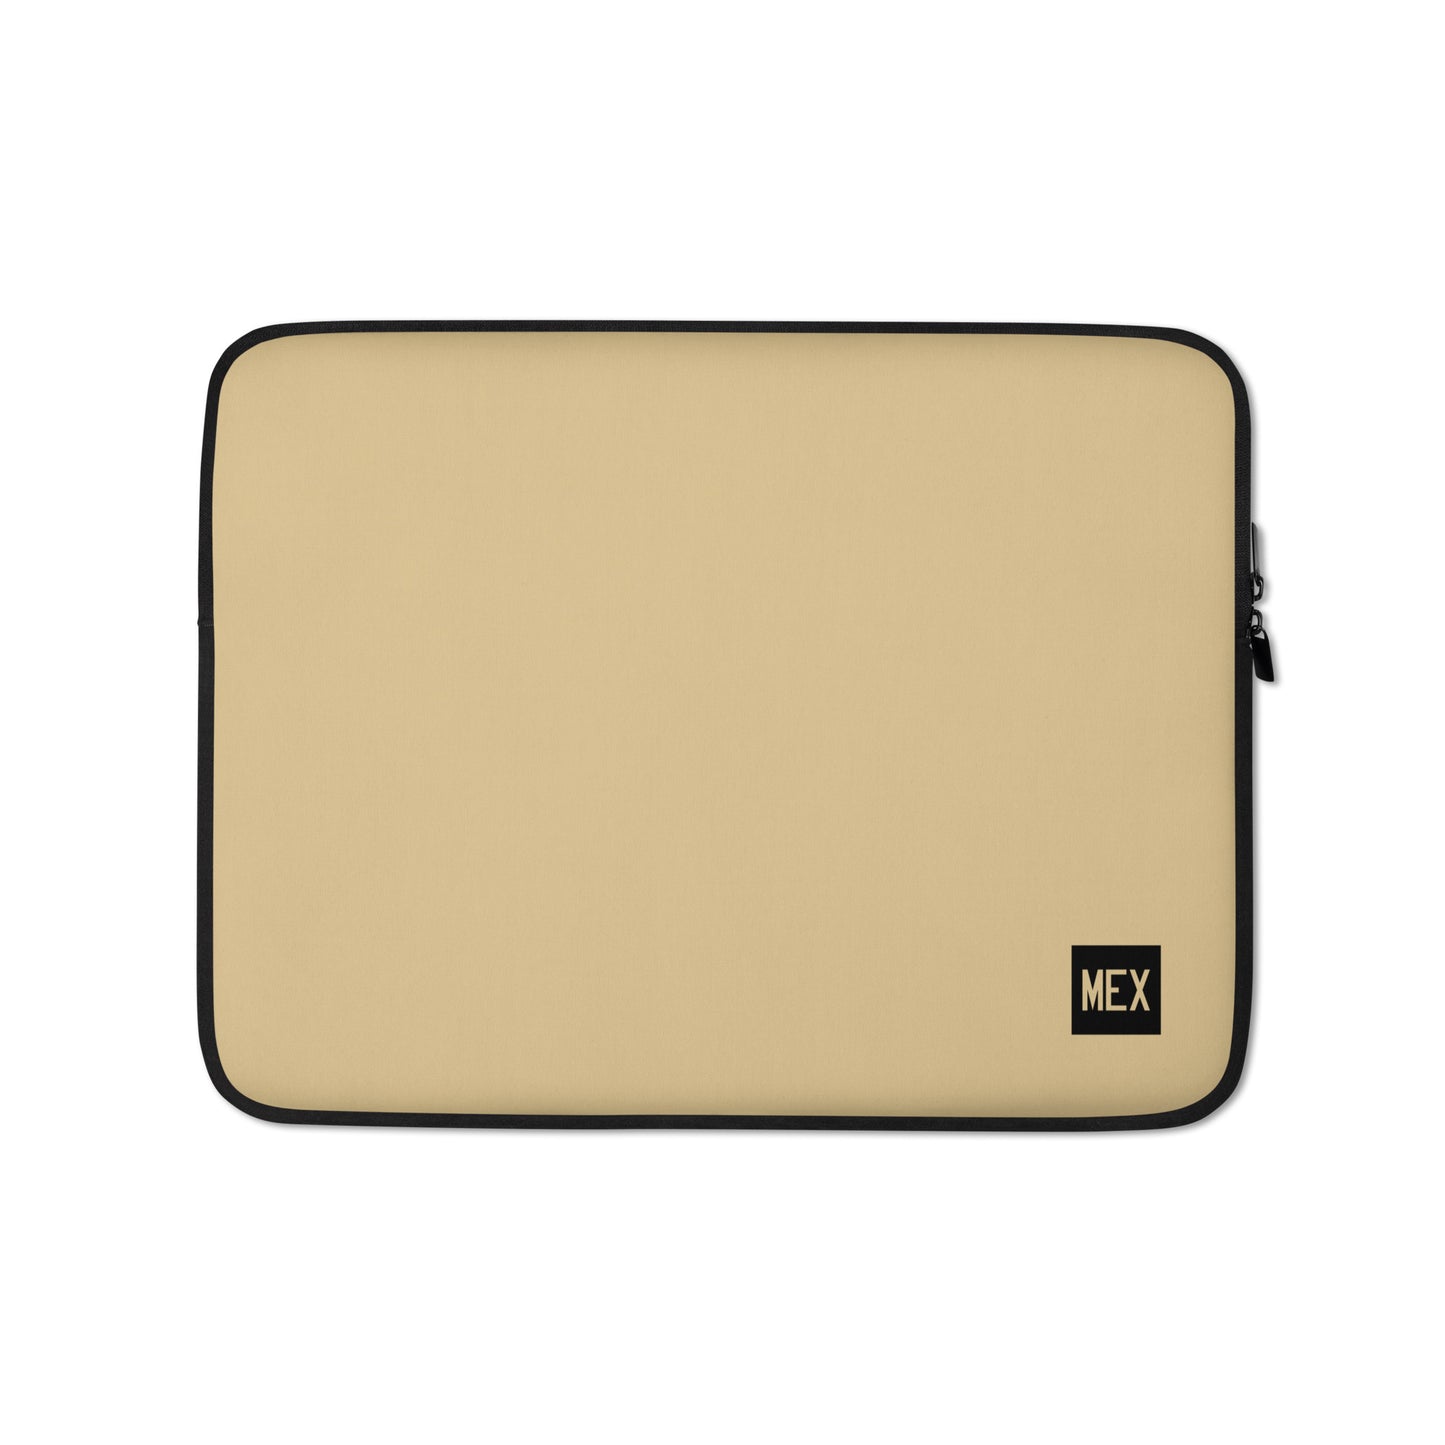 Aviation Gift Laptop Sleeve - Light Brown • MEX Mexico City • YHM Designs - Image 01